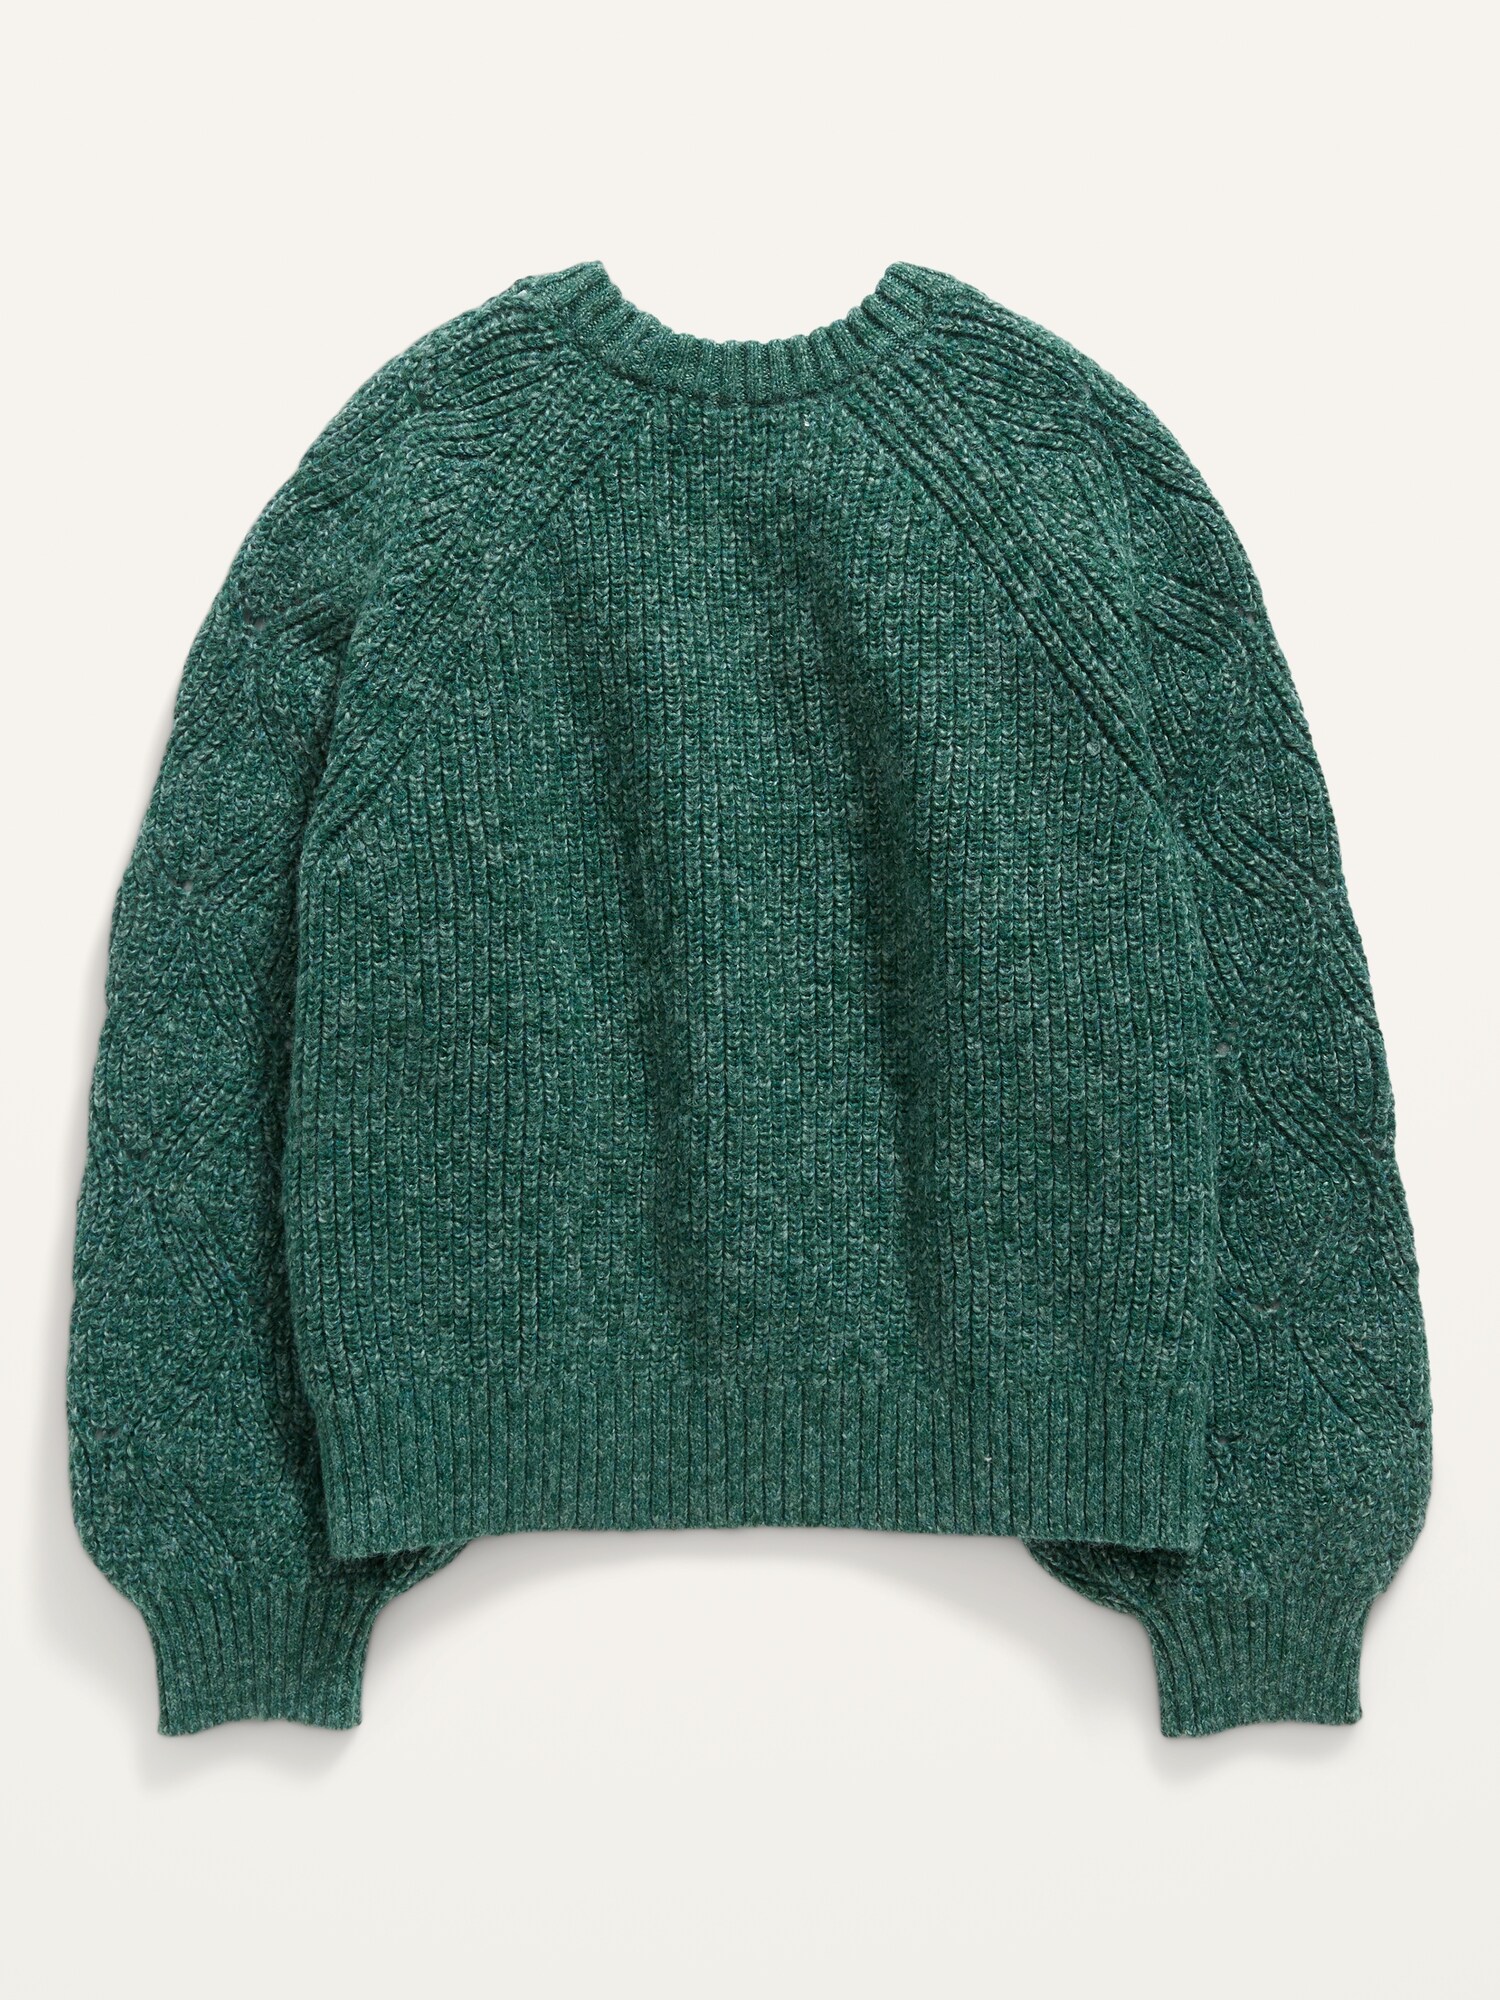 Textured Shaker-Stitch Sweater for Girls | Old Navy